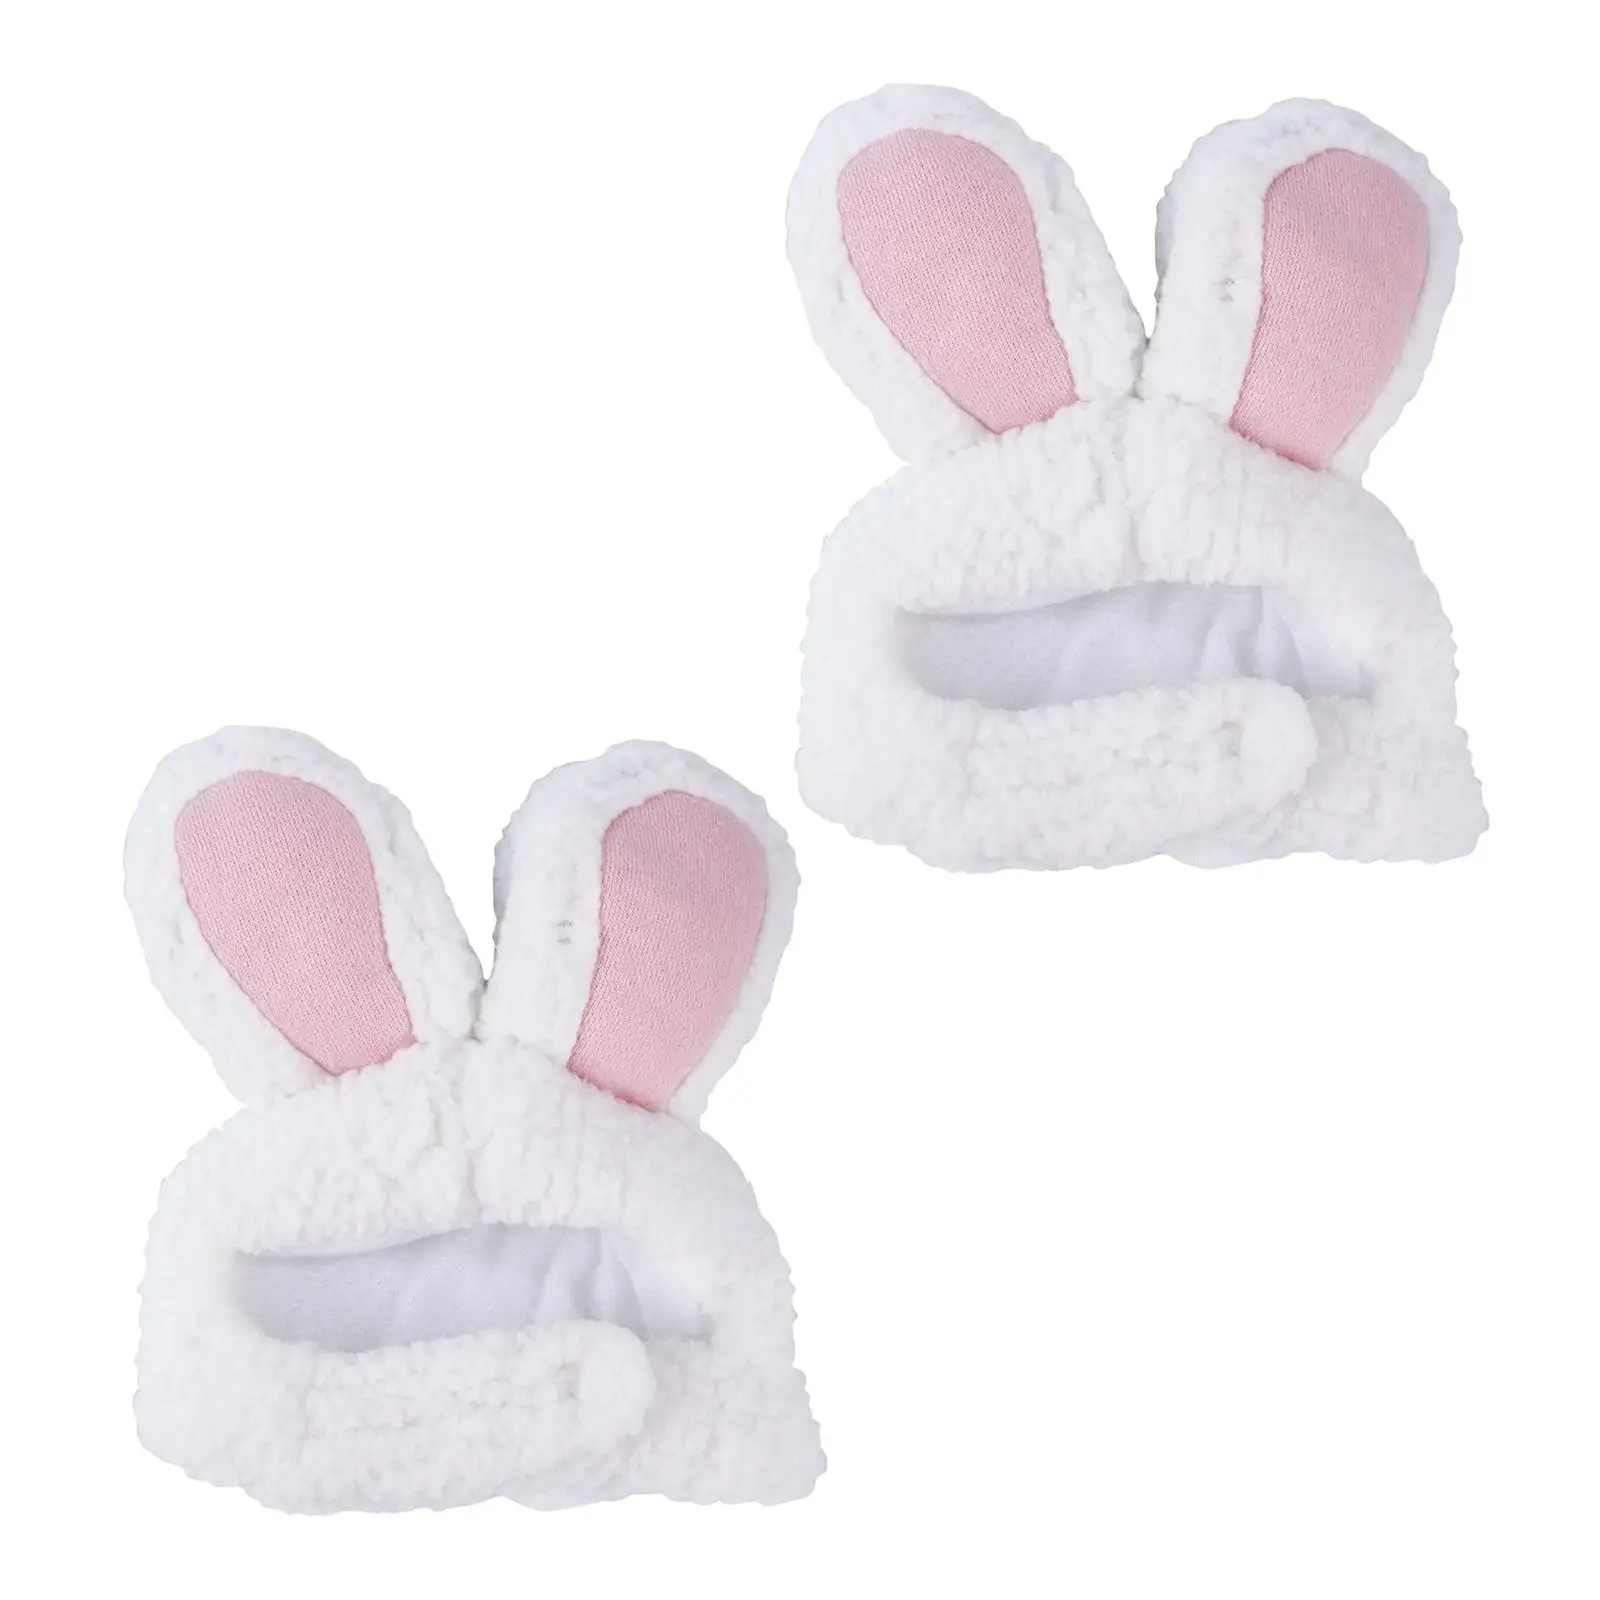 Dog Cat Headwear Rabbit Ears Apparel Clothing Pet Costume for Small Medium Dogs Halloween Easter Photograph Daily wearing